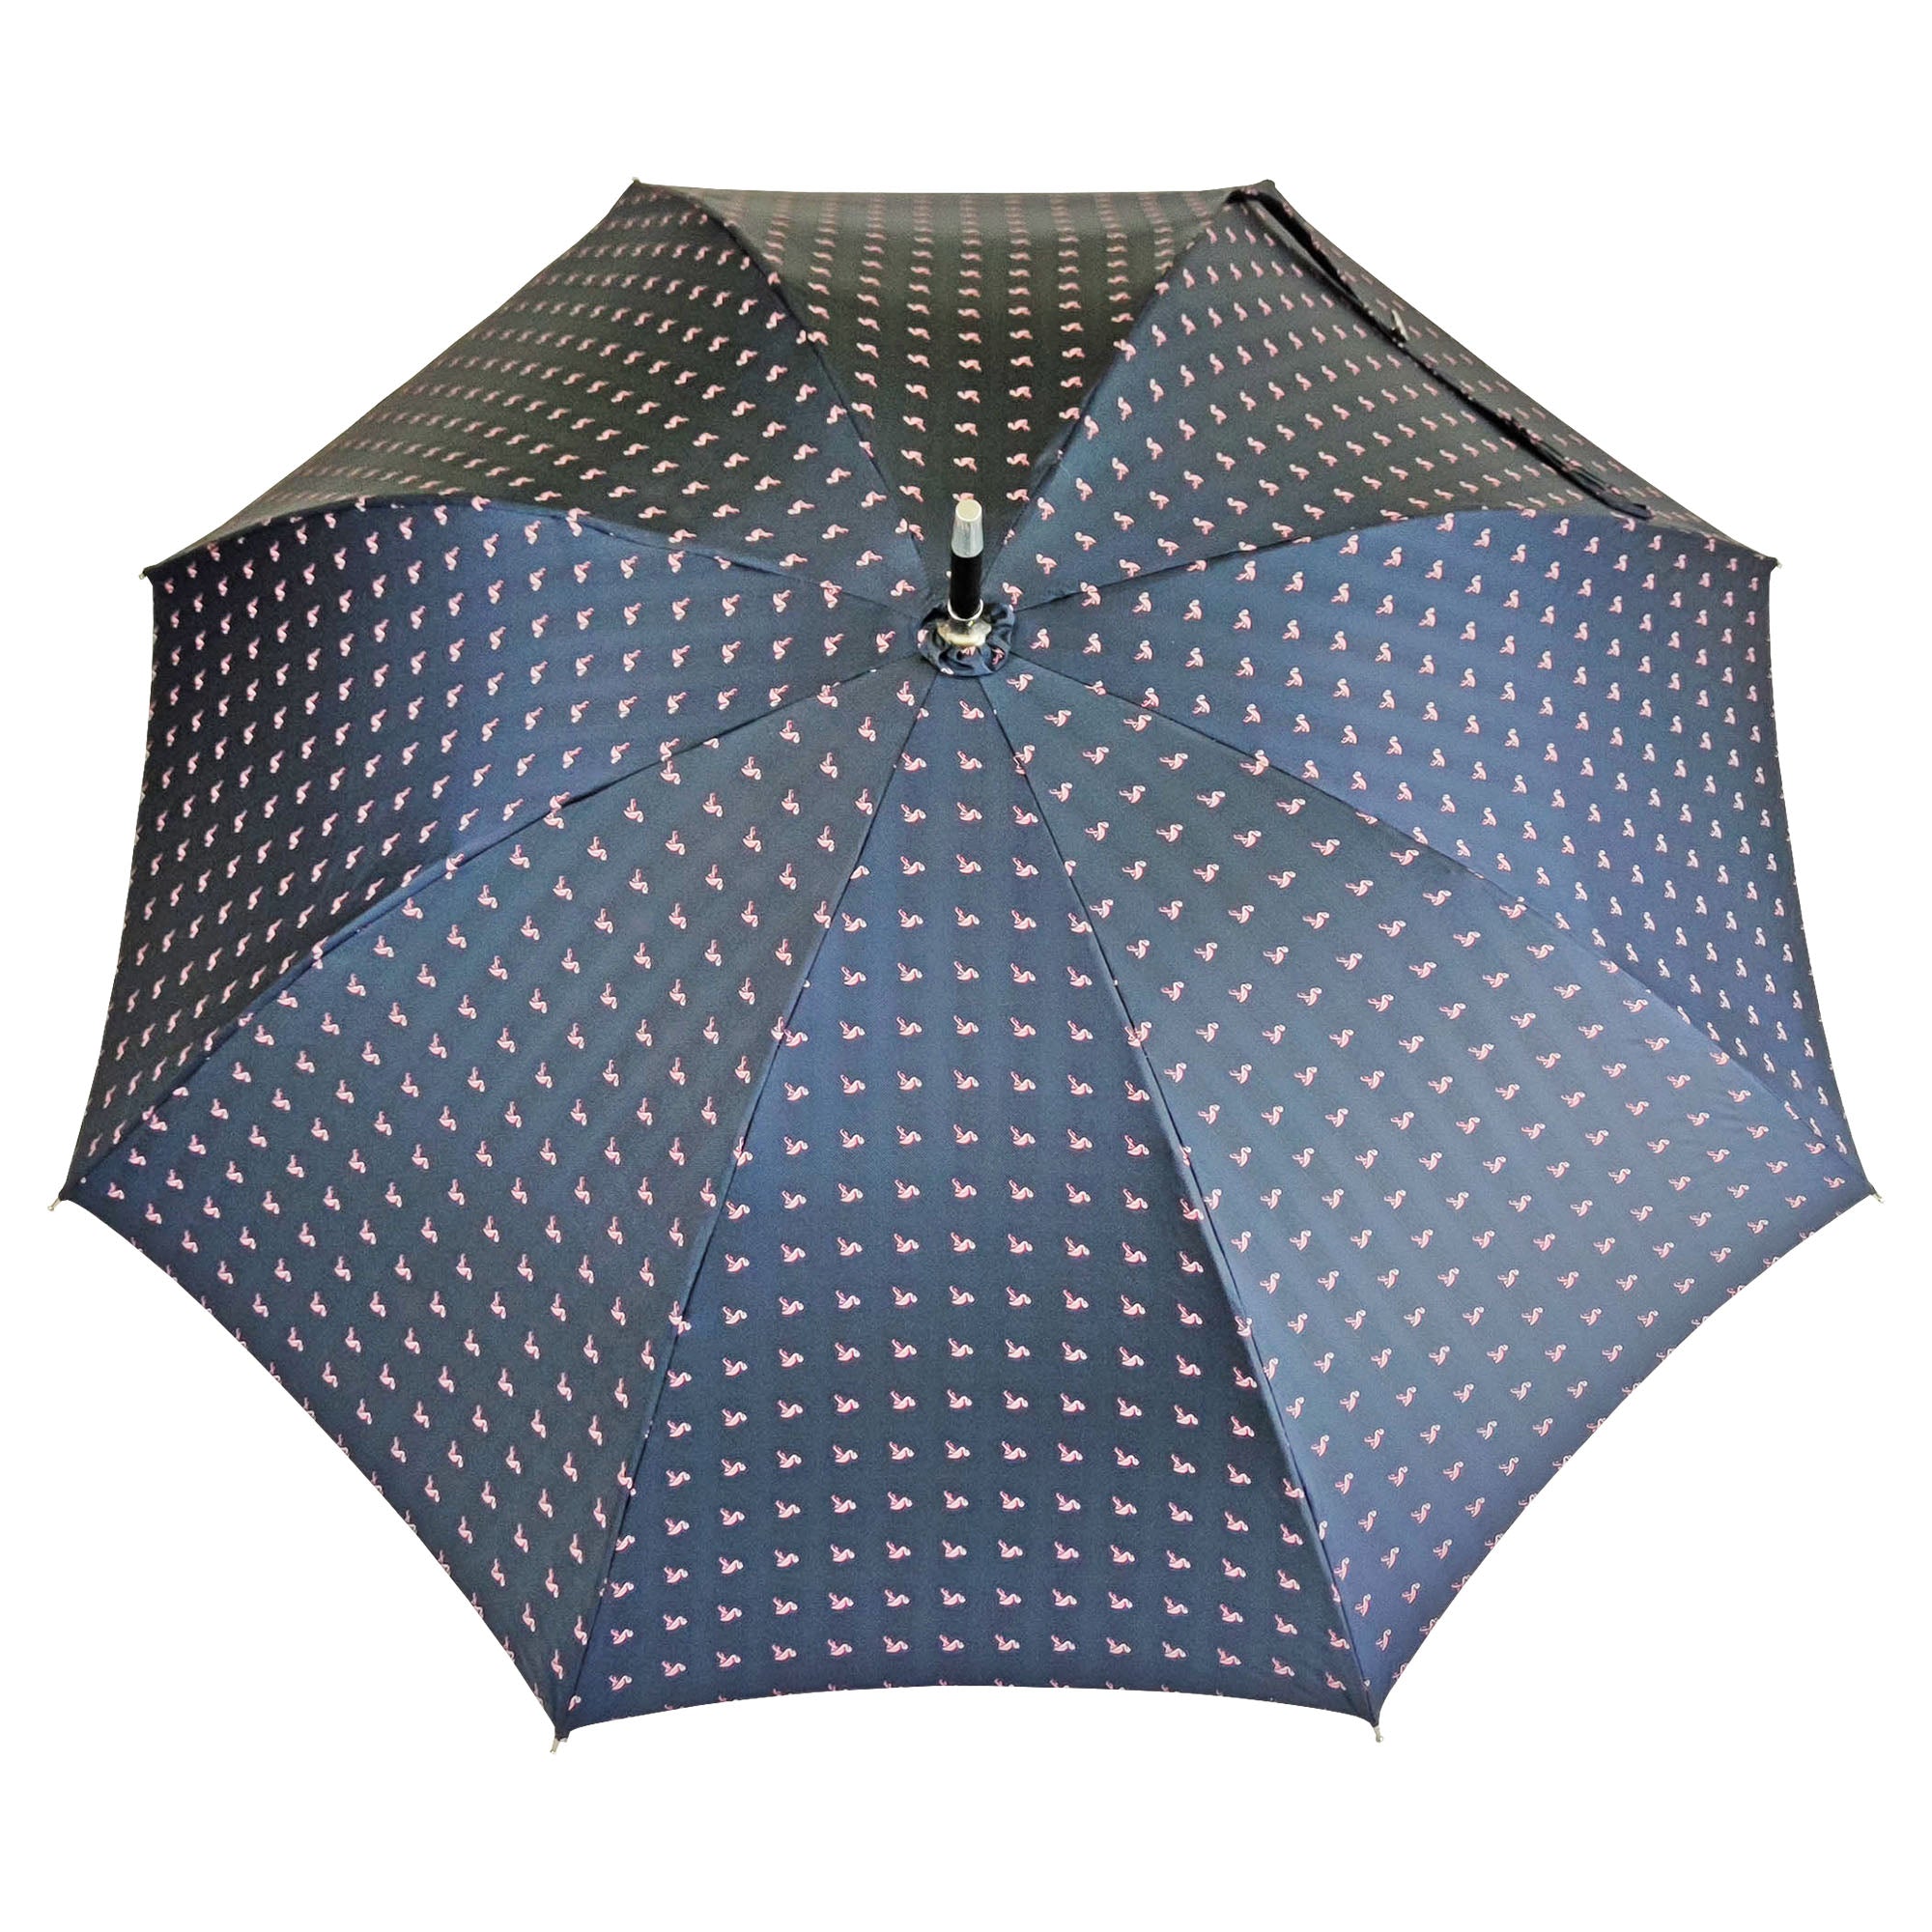 Exclusive umbrella design with Silver Plated handle